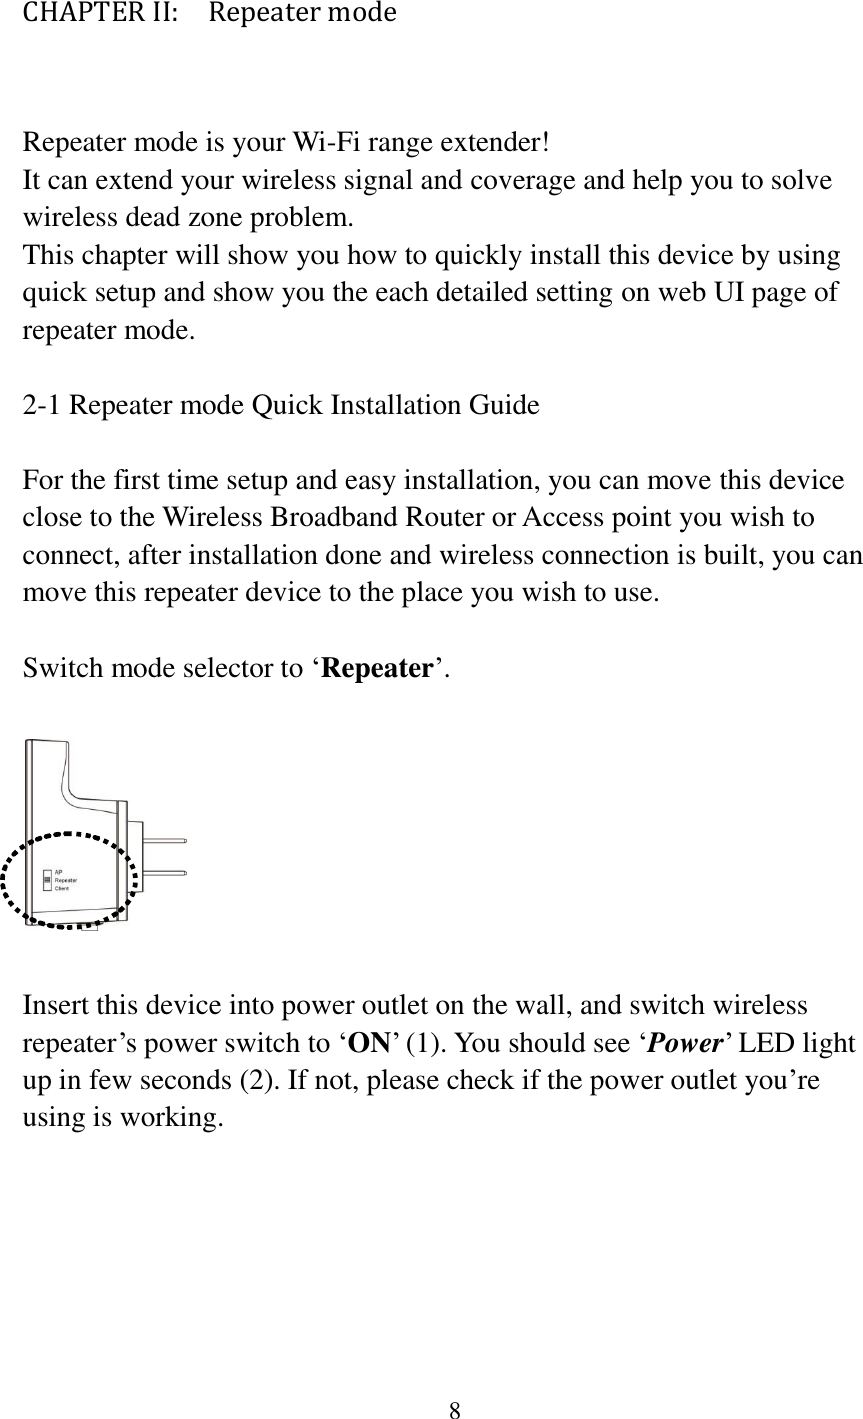 8  CHAPTER II:    Repeater mode  Repeater mode is your Wi-Fi range extender! It can extend your wireless signal and coverage and help you to solve wireless dead zone problem.   This chapter will show you how to quickly install this device by using quick setup and show you the each detailed setting on web UI page of repeater mode.    2-1 Repeater mode Quick Installation Guide  For the first time setup and easy installation, you can move this device close to the Wireless Broadband Router or Access point you wish to connect, after installation done and wireless connection is built, you can move this repeater device to the place you wish to use.  Switch mode selector to „Repeater‟.    Insert this device into power outlet on the wall, and switch wireless repeater‟s power switch to „ON‟ (1). You should see „Power‟ LED light up in few seconds (2). If not, please check if the power outlet you‟re using is working.  